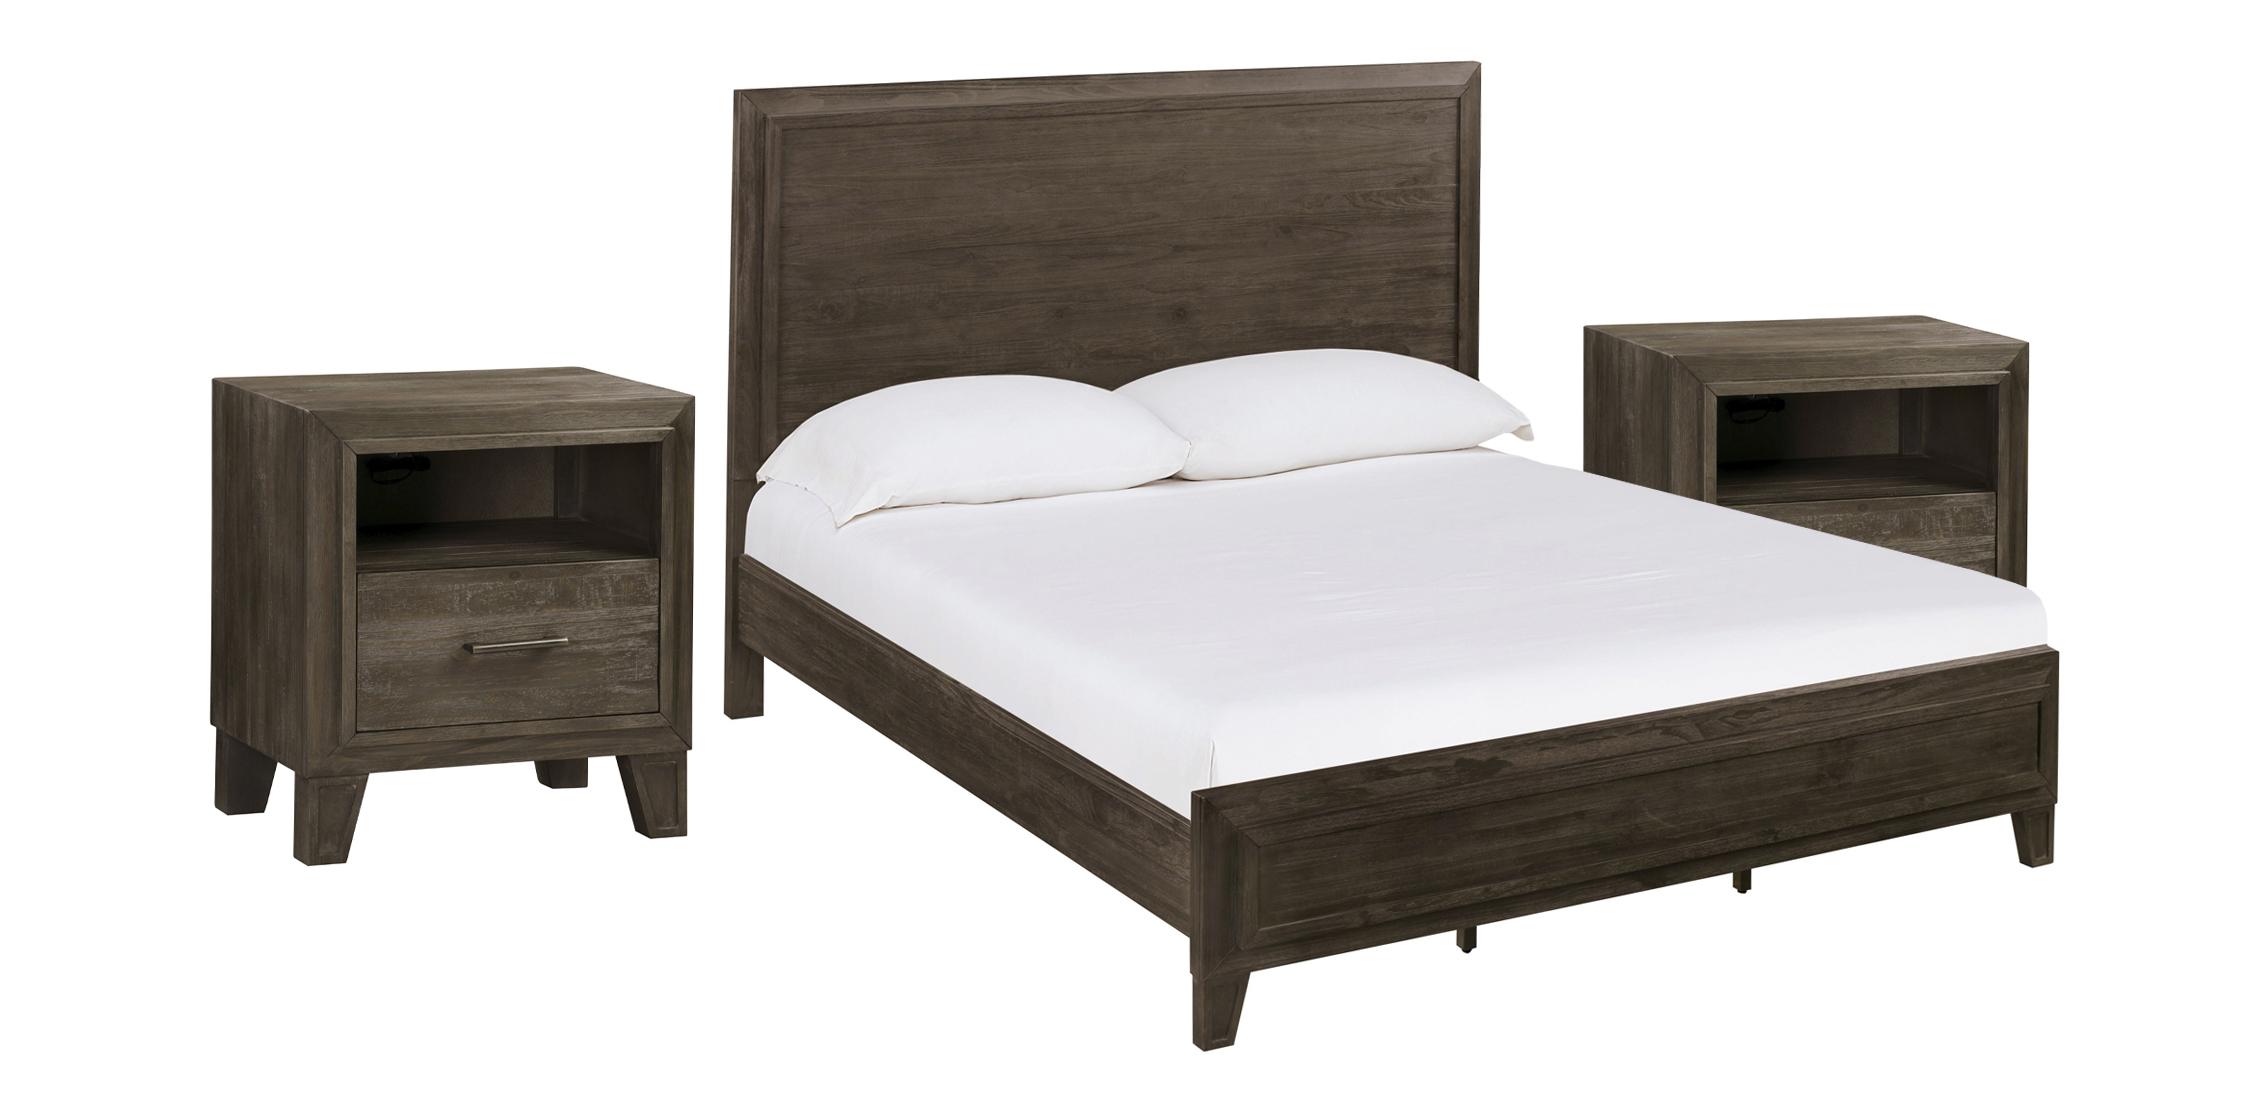 Casual, Rustic Panel Bedroom Set HADLEY A4H6A5-2N-3PC in Onyx 